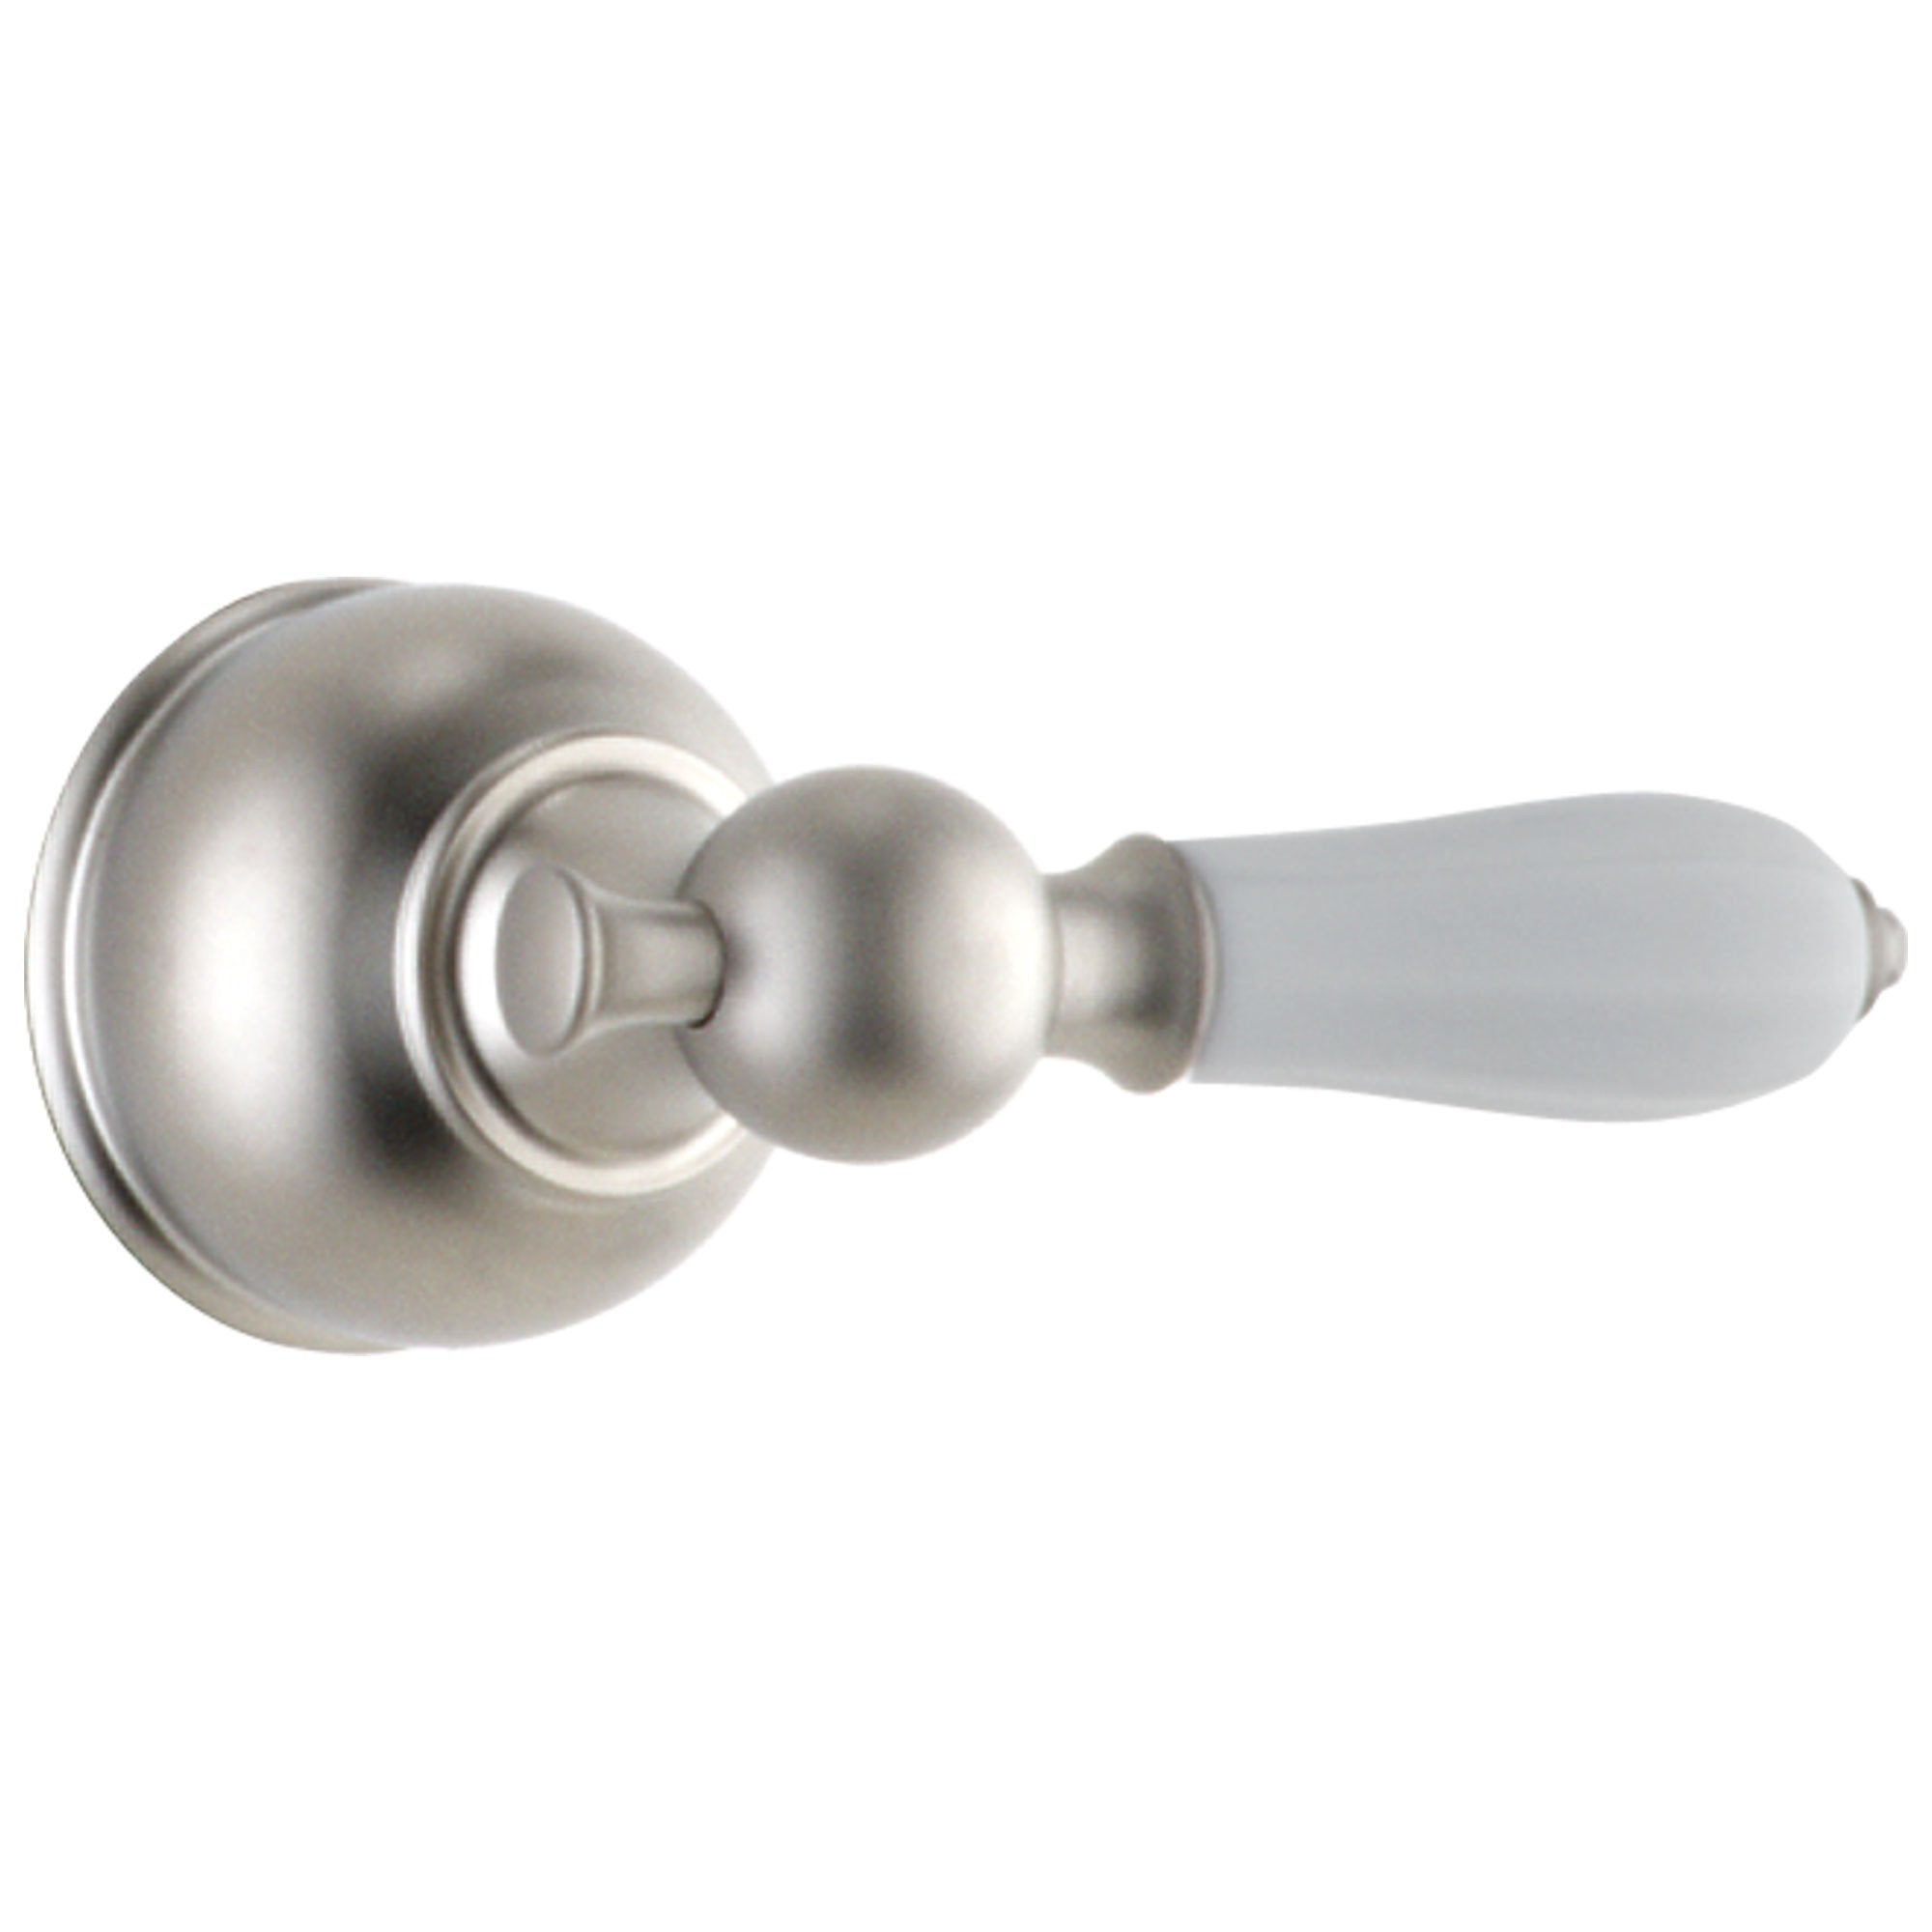 Delta Stainless Steel Finish Tub and Shower Porcelain Lever Handle 560257